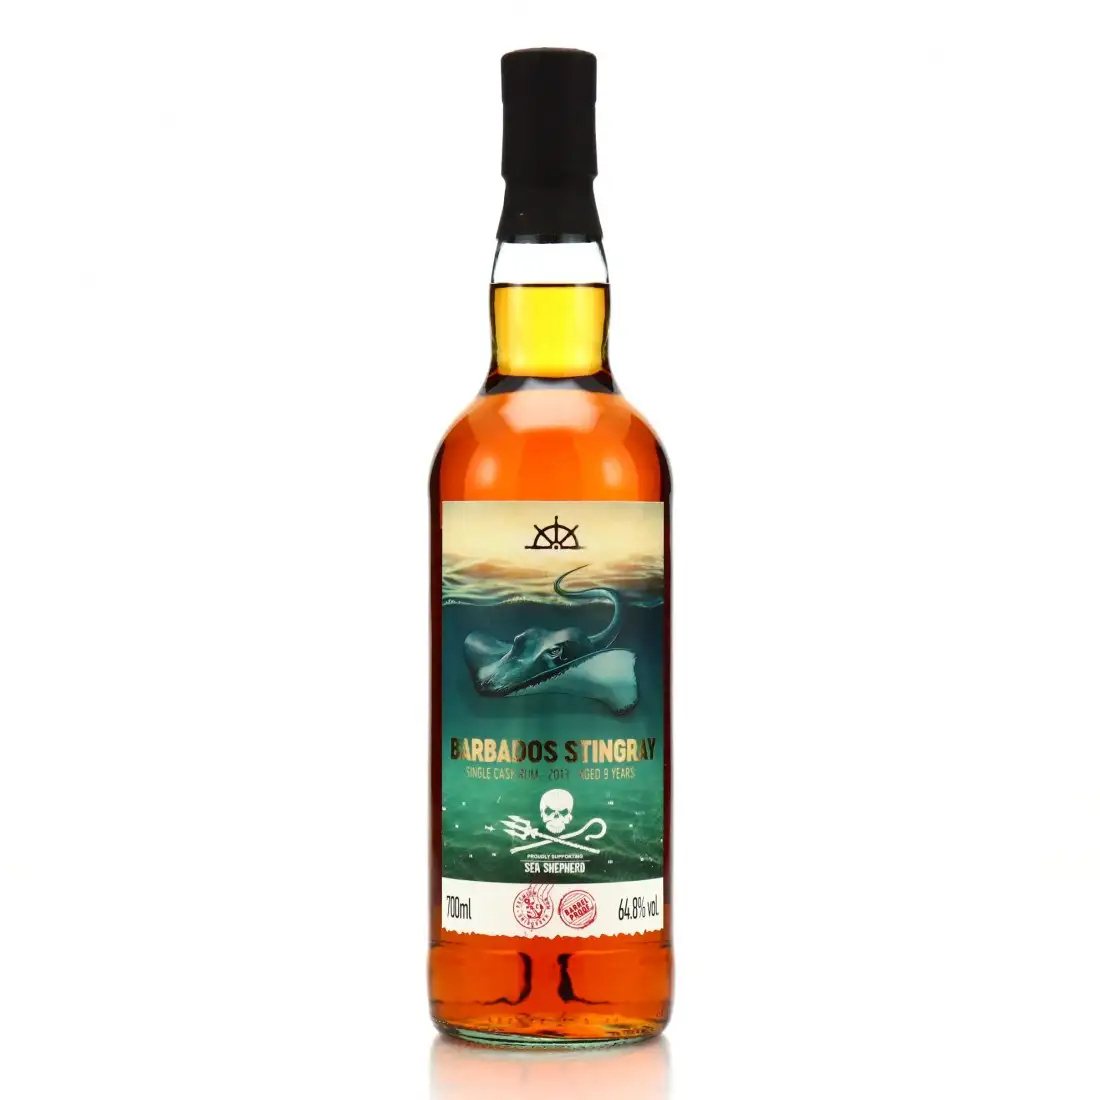 Image of the front of the bottle of the rum Barbados Stingray